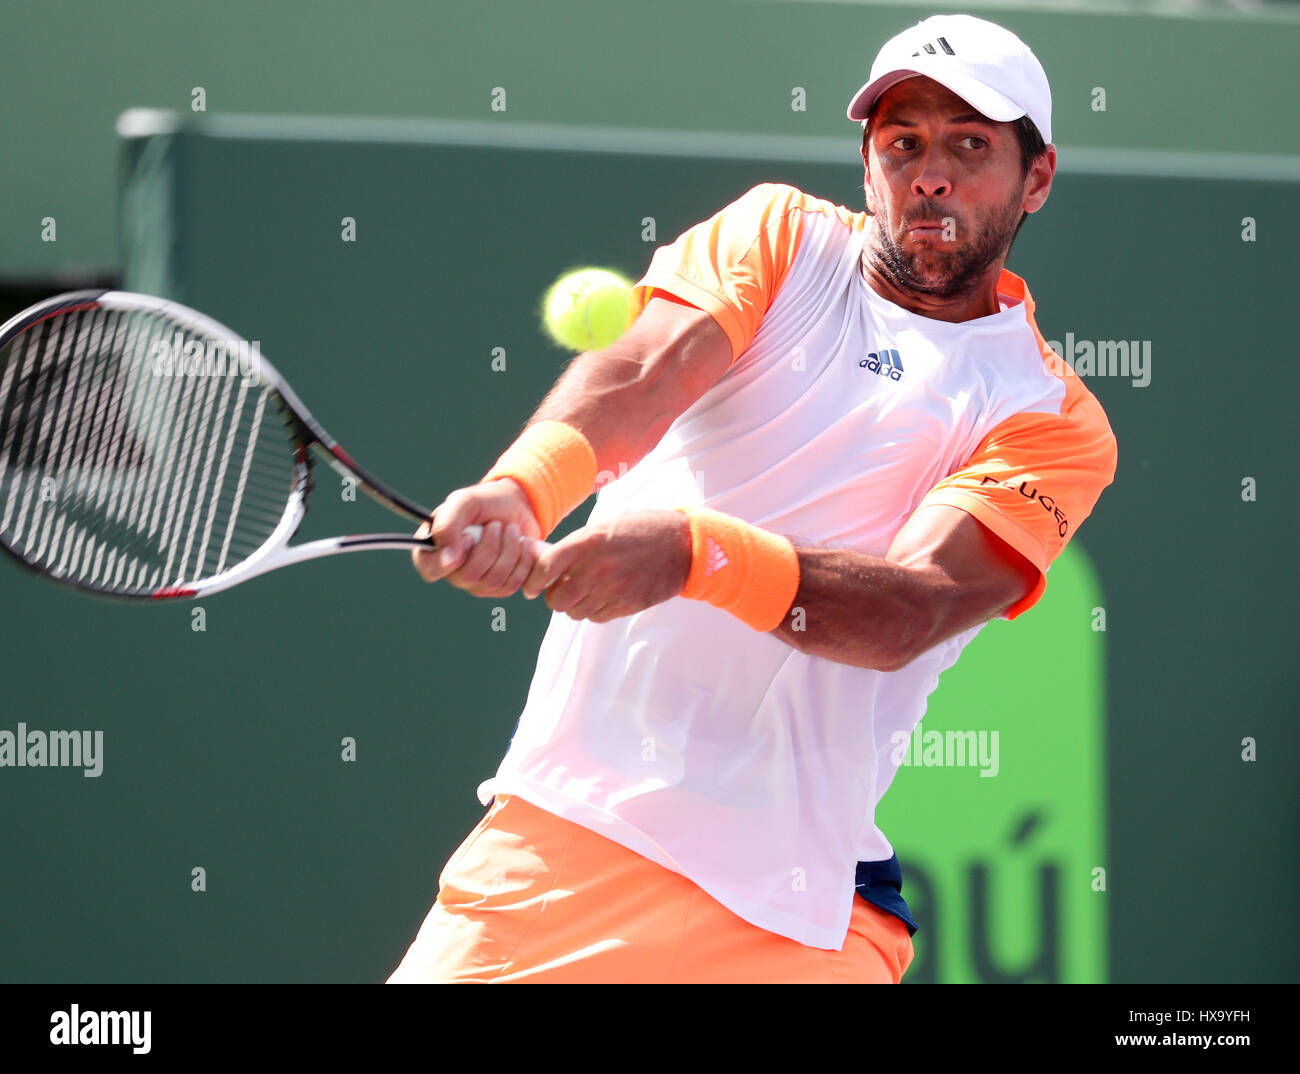 Key Biscayne, Florida, USA. 26th Mar, 2017. Fernando Verdasco, of Spain, prepares to hit a backhand against Kei Nishikori, of Japan, at the 2017 Miami Open presented by Itau professional tennis tournament, played at Crandon Park Tennis Center in Key Biscayne, Florida, USA. Nishikori d Verdasco 7-6(2) 6-7(5) 6-1. Mario Houben/CSM/Alamy Live News Stock Photo